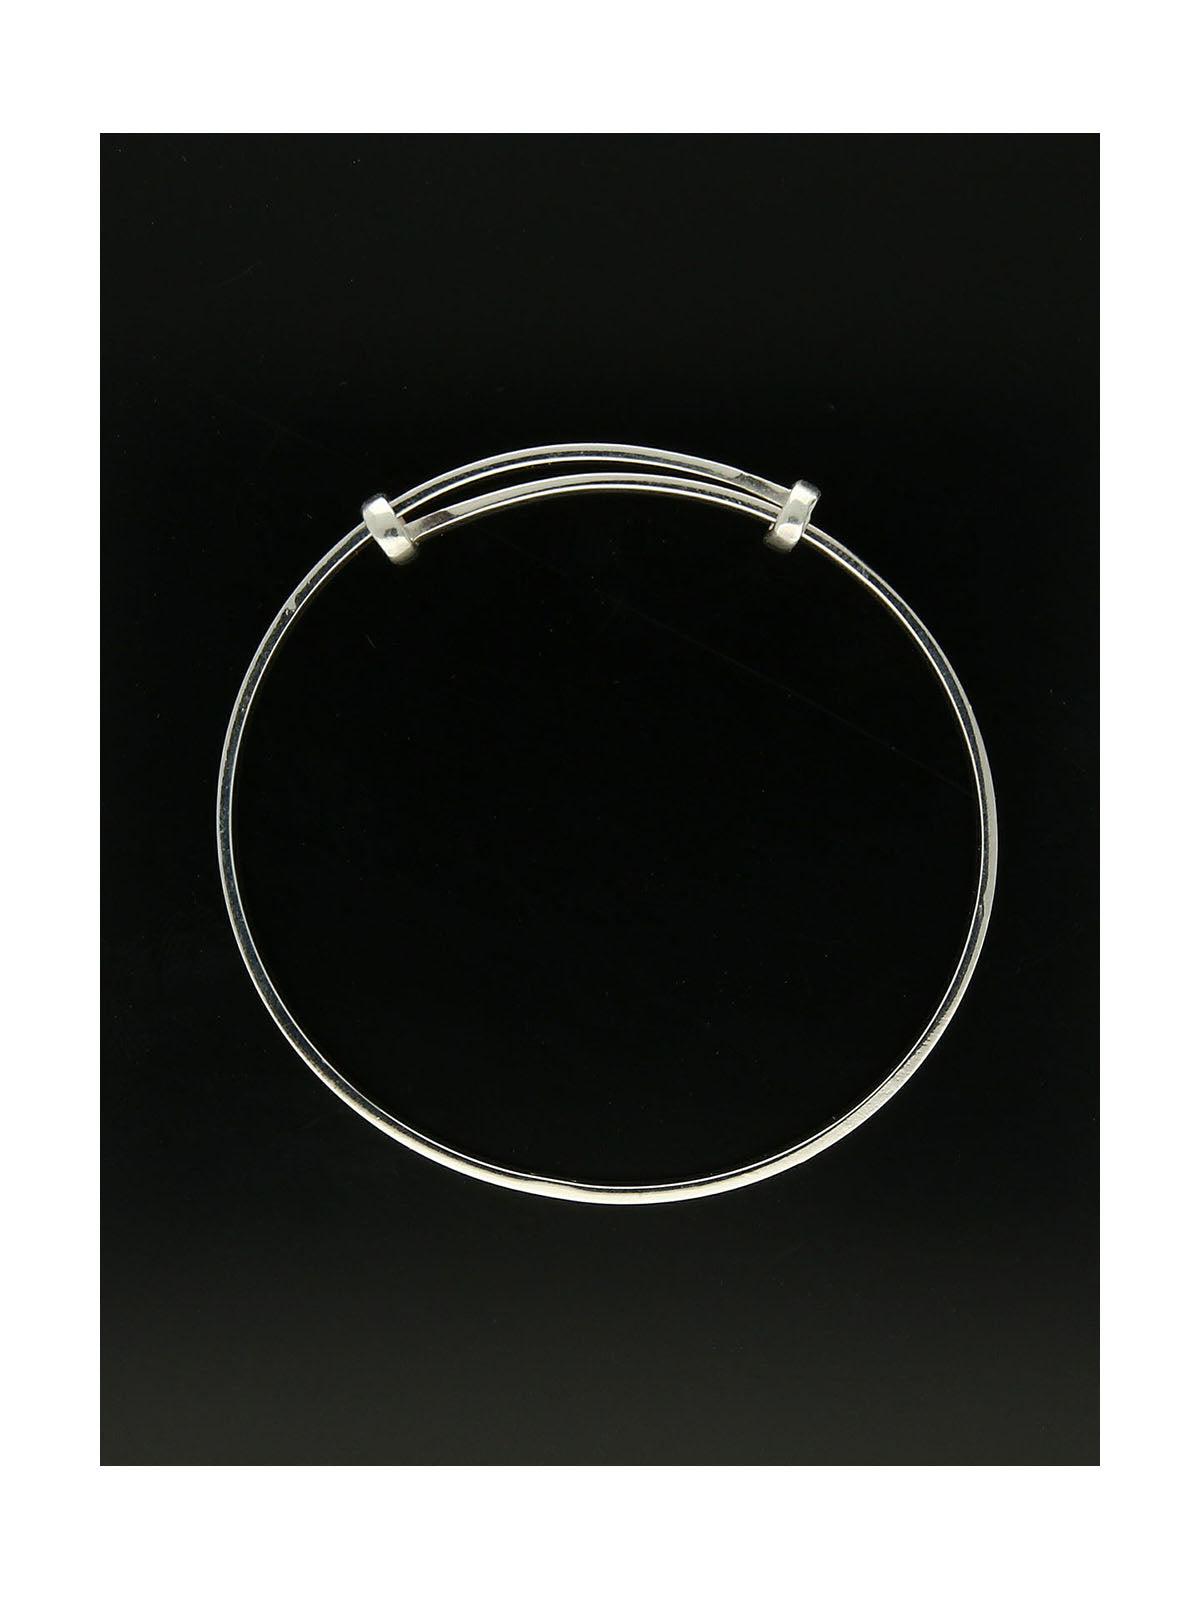 Baby's Plain Expanding Bangle in Silver